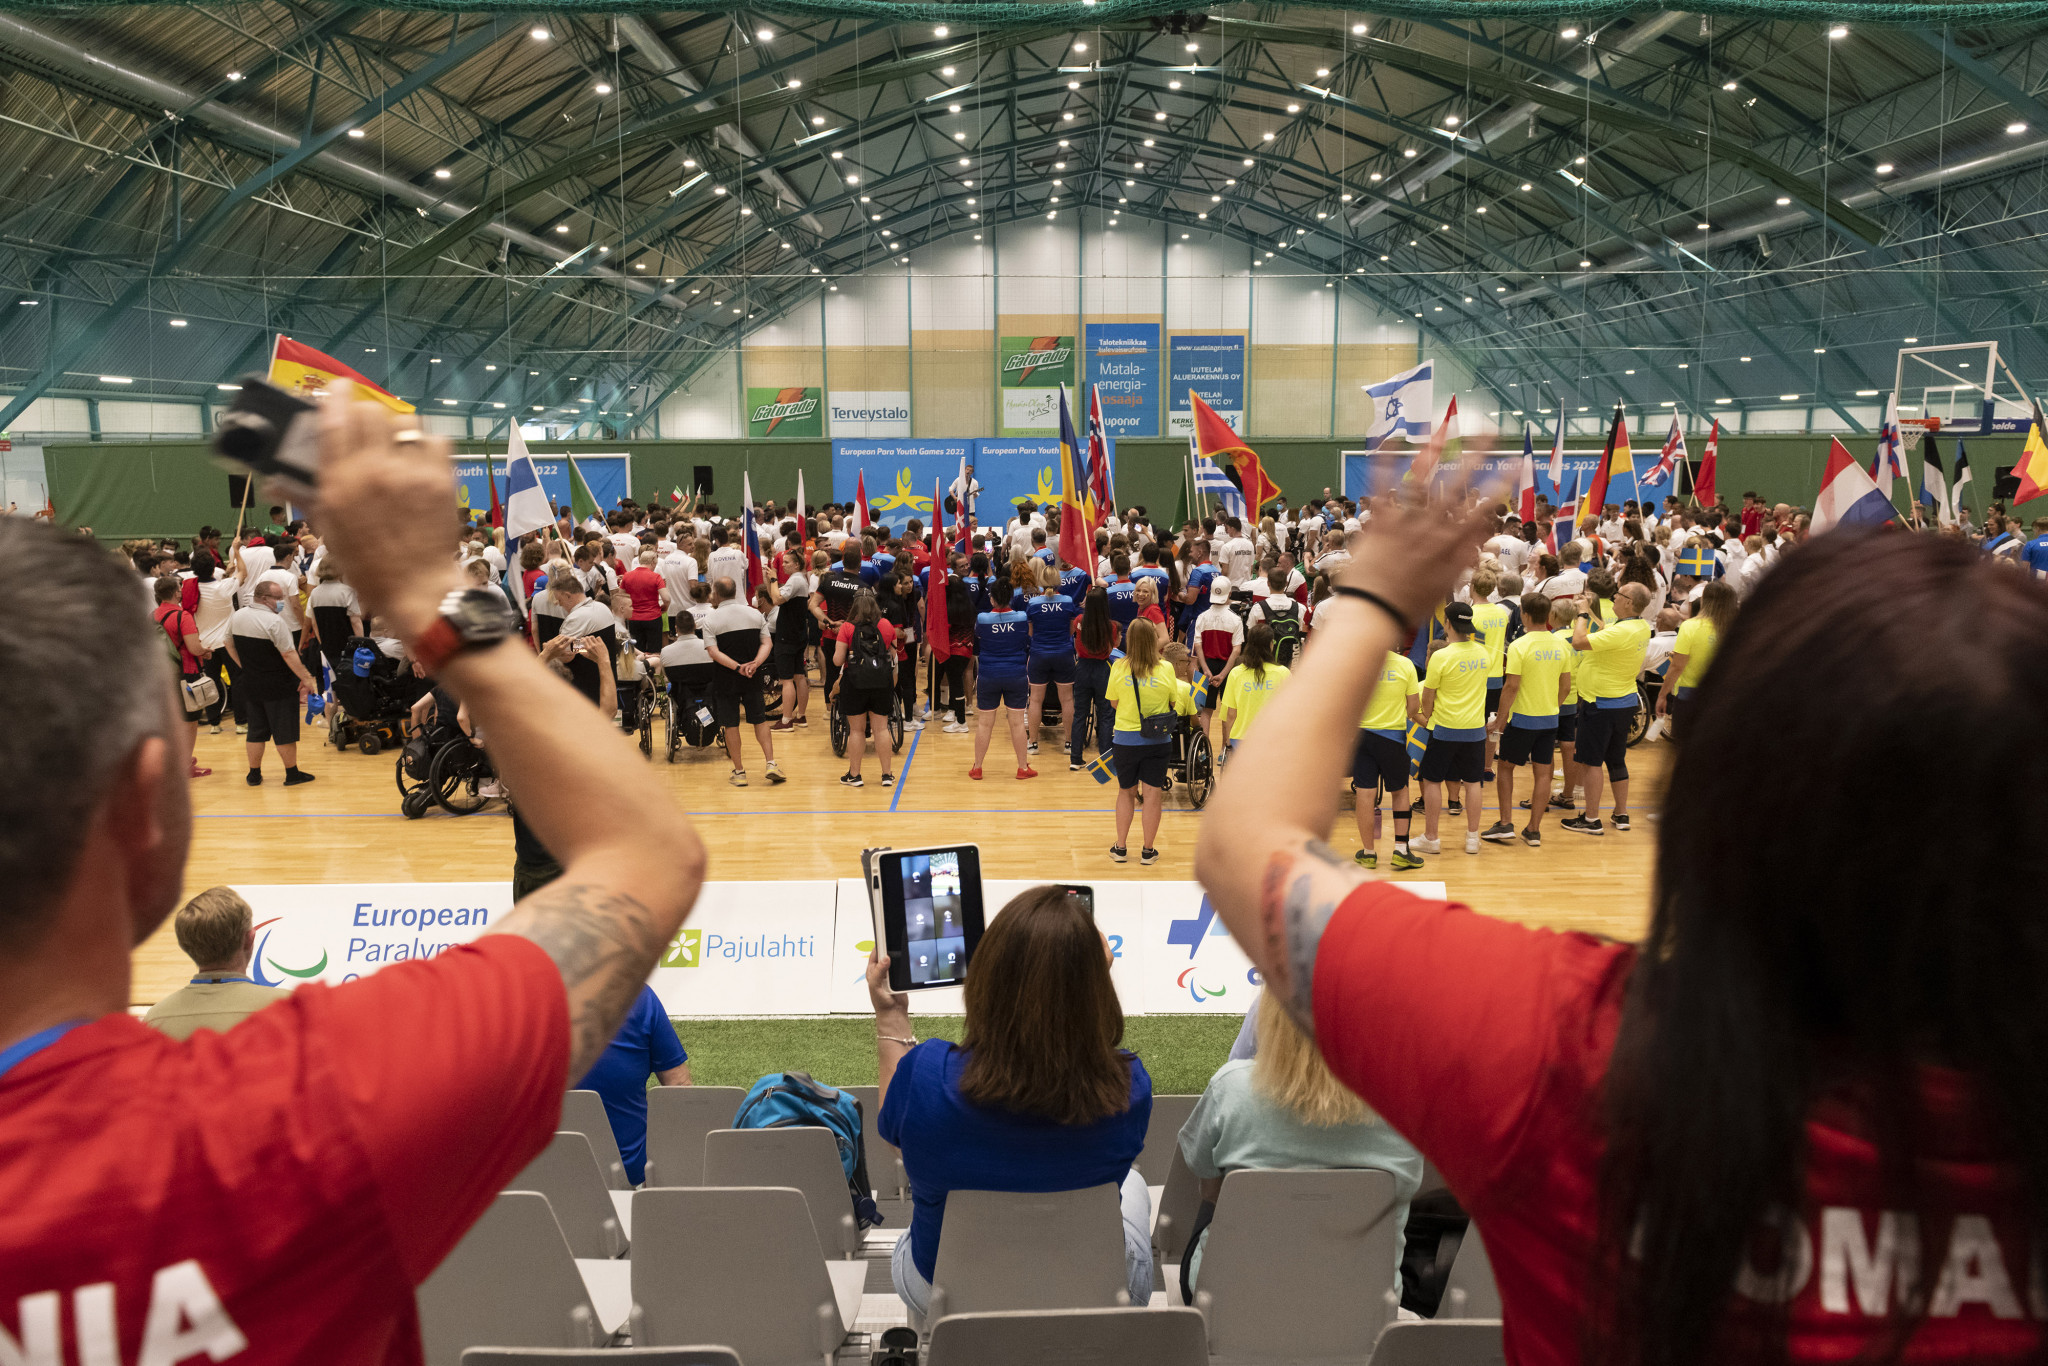 More than 400 athletes competed in the last edition of the European Para Youth Games in 2022 ©European Paralympic Committee